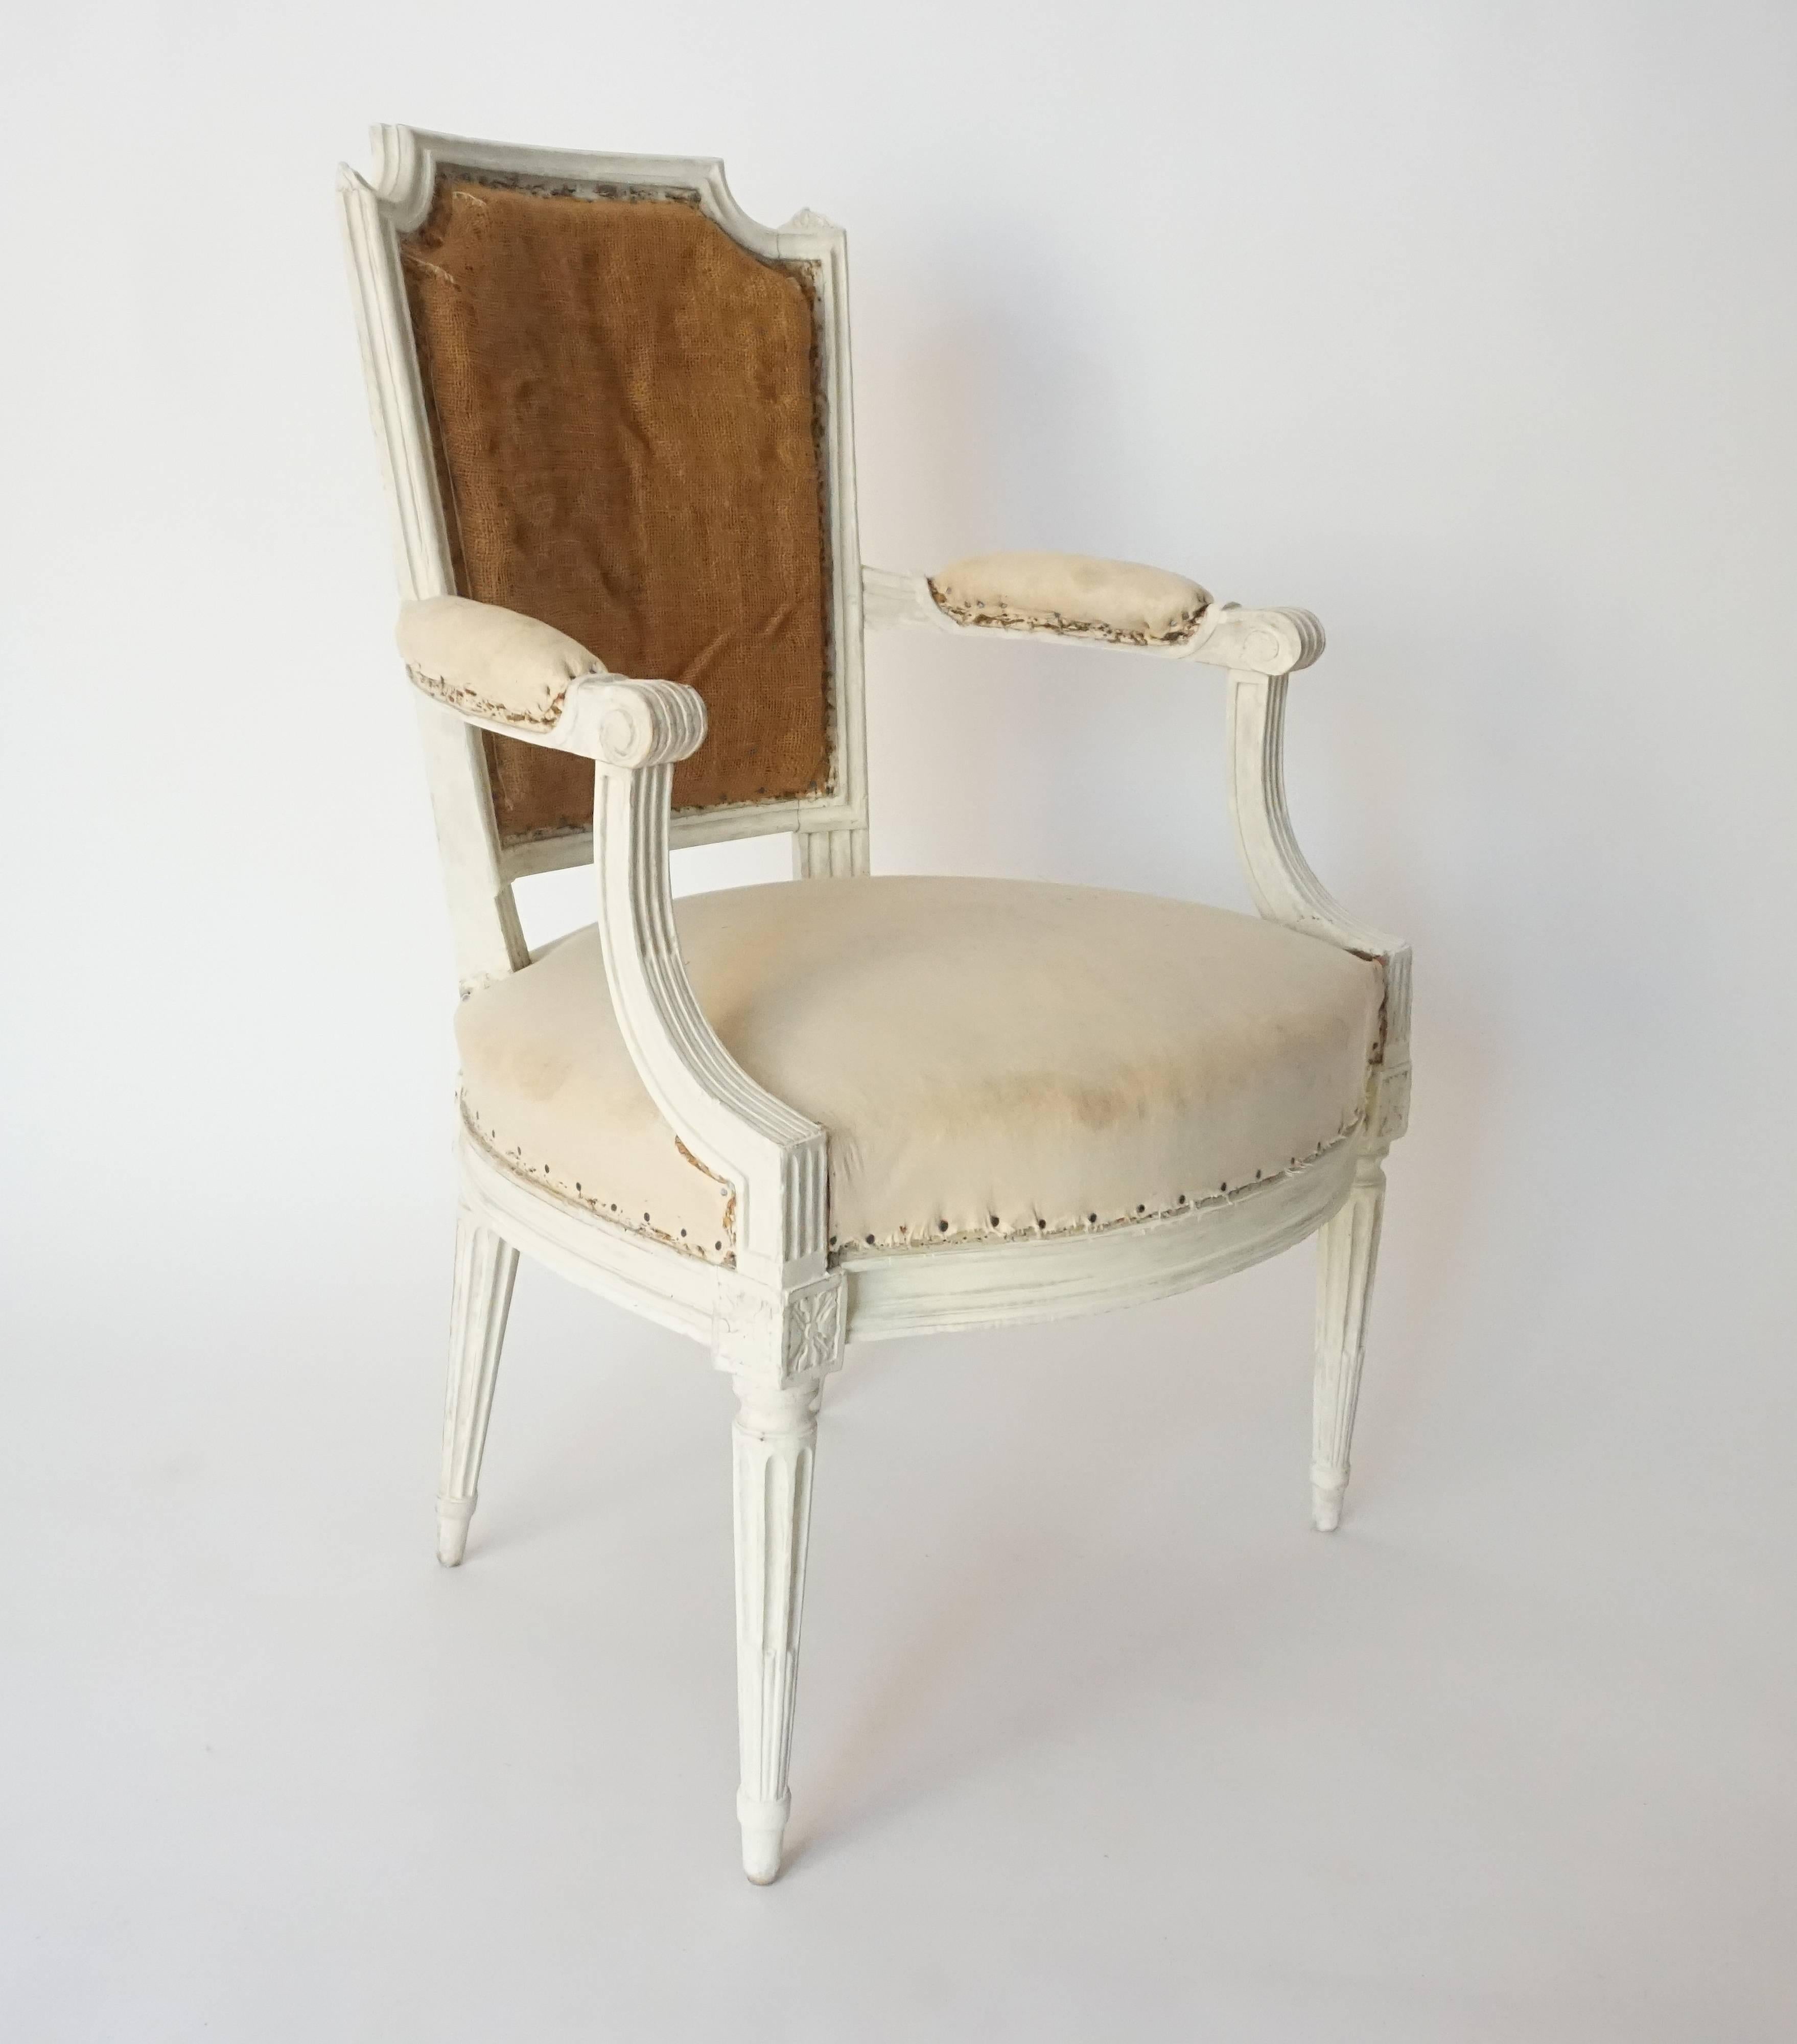 French, circa 1780 Louis XVI fauteuil or armchair having carved fruitwood frame in original paint with 